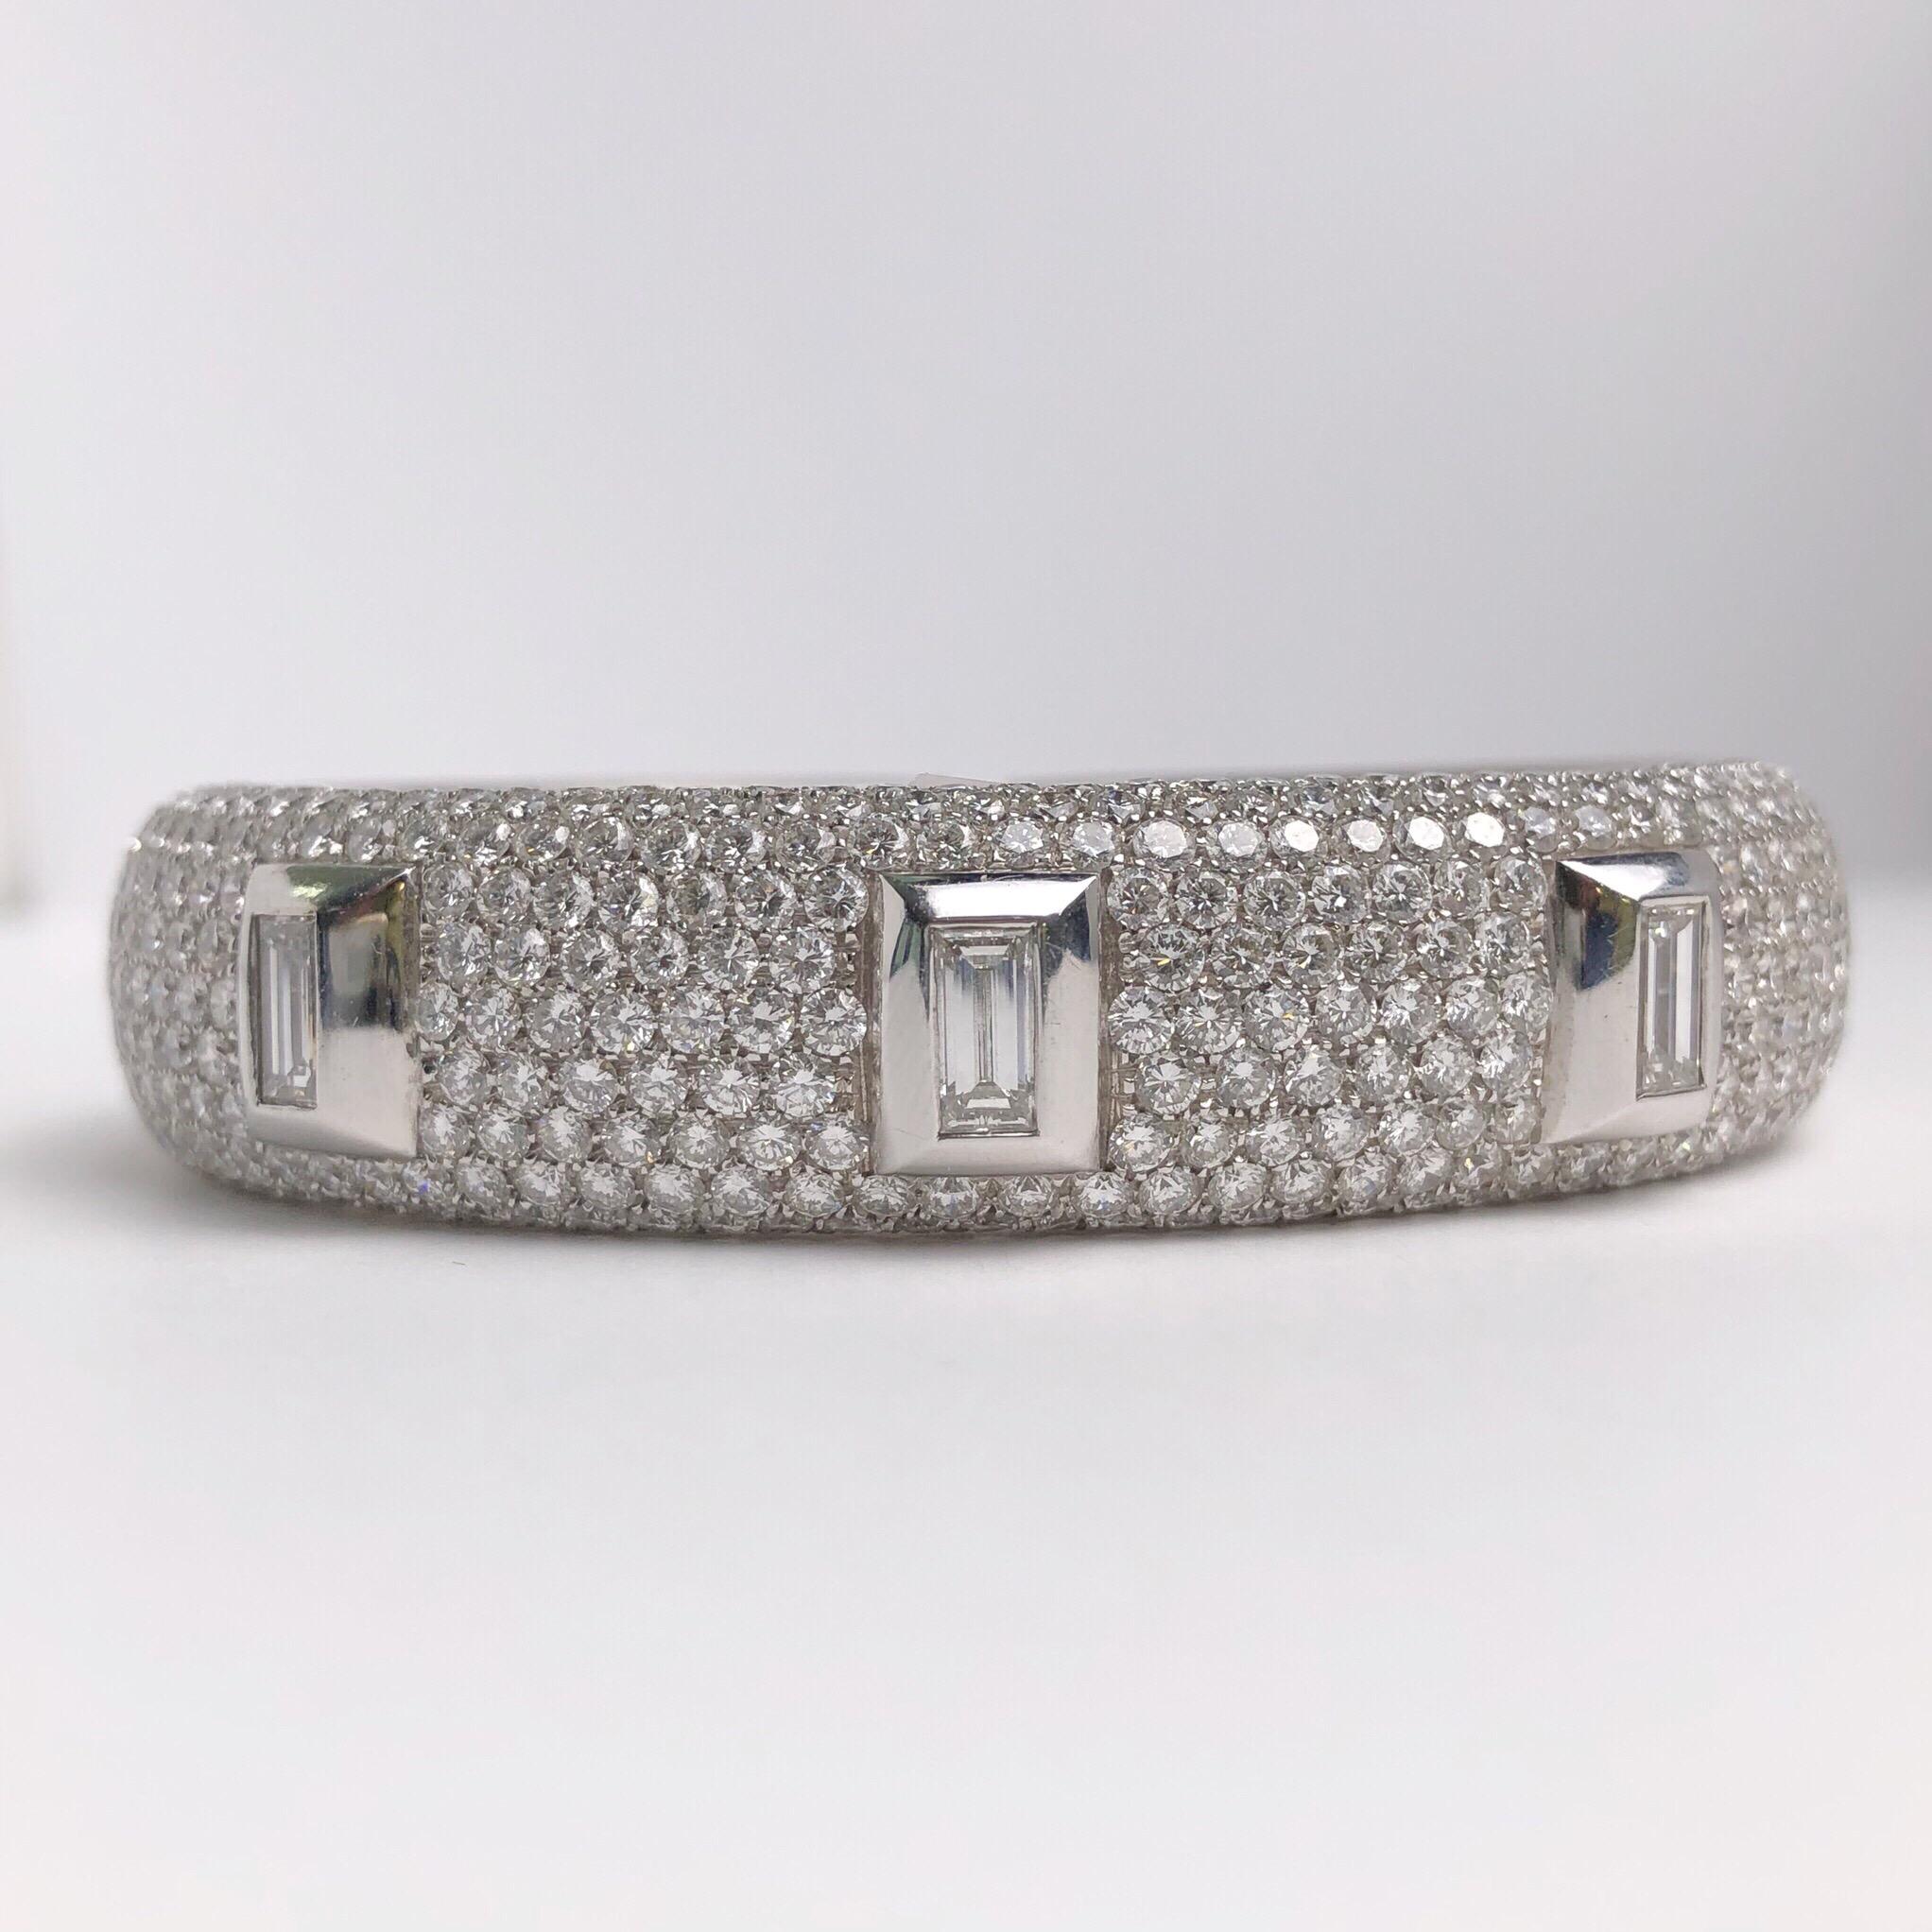 Made exclusively for Cellini by g.Verdi of Italy. This 14mm wide bangle is pave diamond set,along with three bezel set baguette shaped diamond solitaires. Total diamond weight 10.13 carats. The pave diamonds go halfway around. The other half is